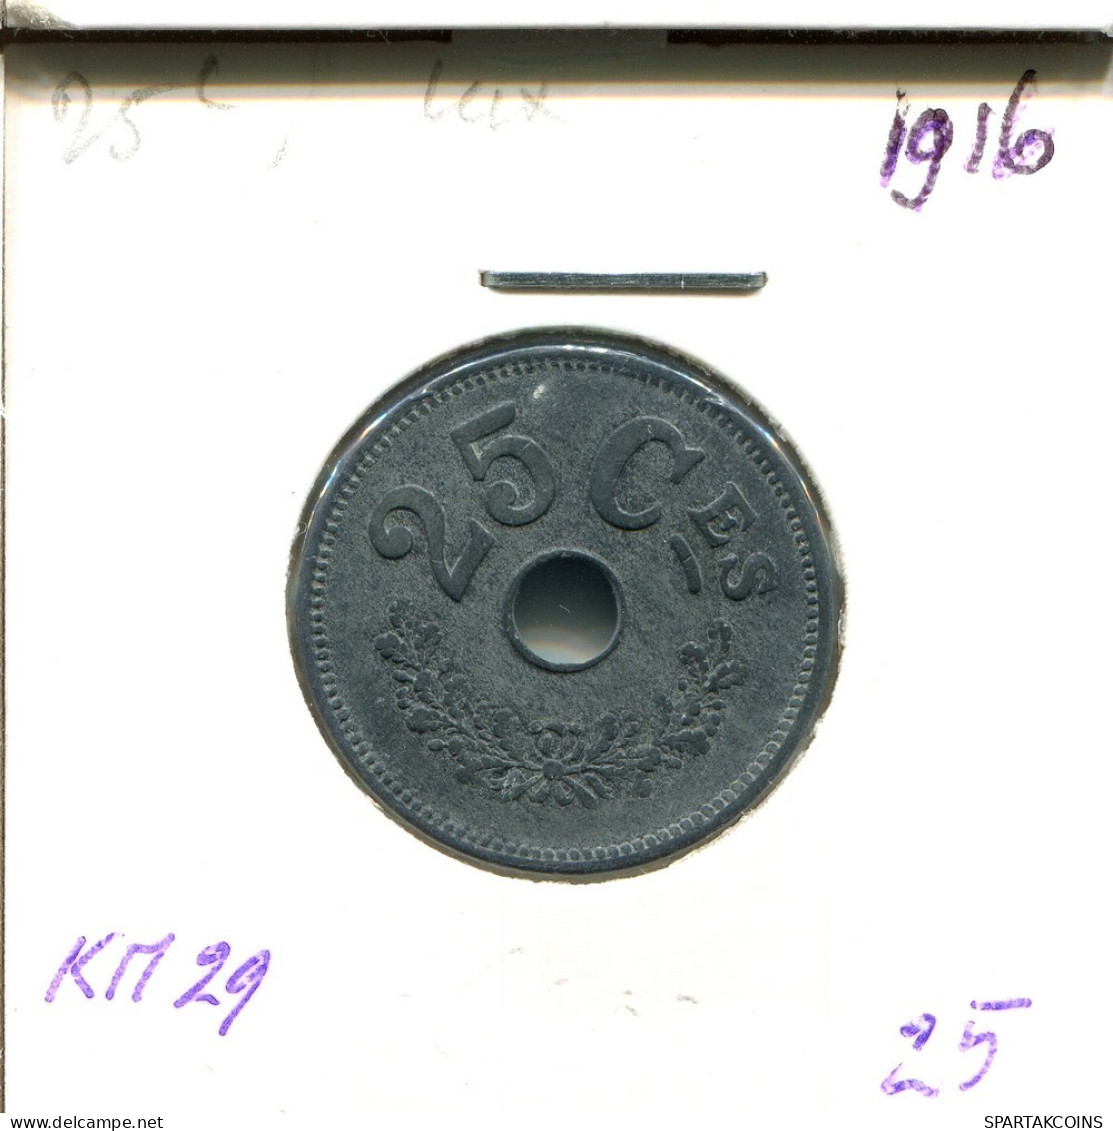 25 CENTIMES 1916 LUXEMBURG LUXEMBOURG Münze #AT183.D.A - Luxembourg